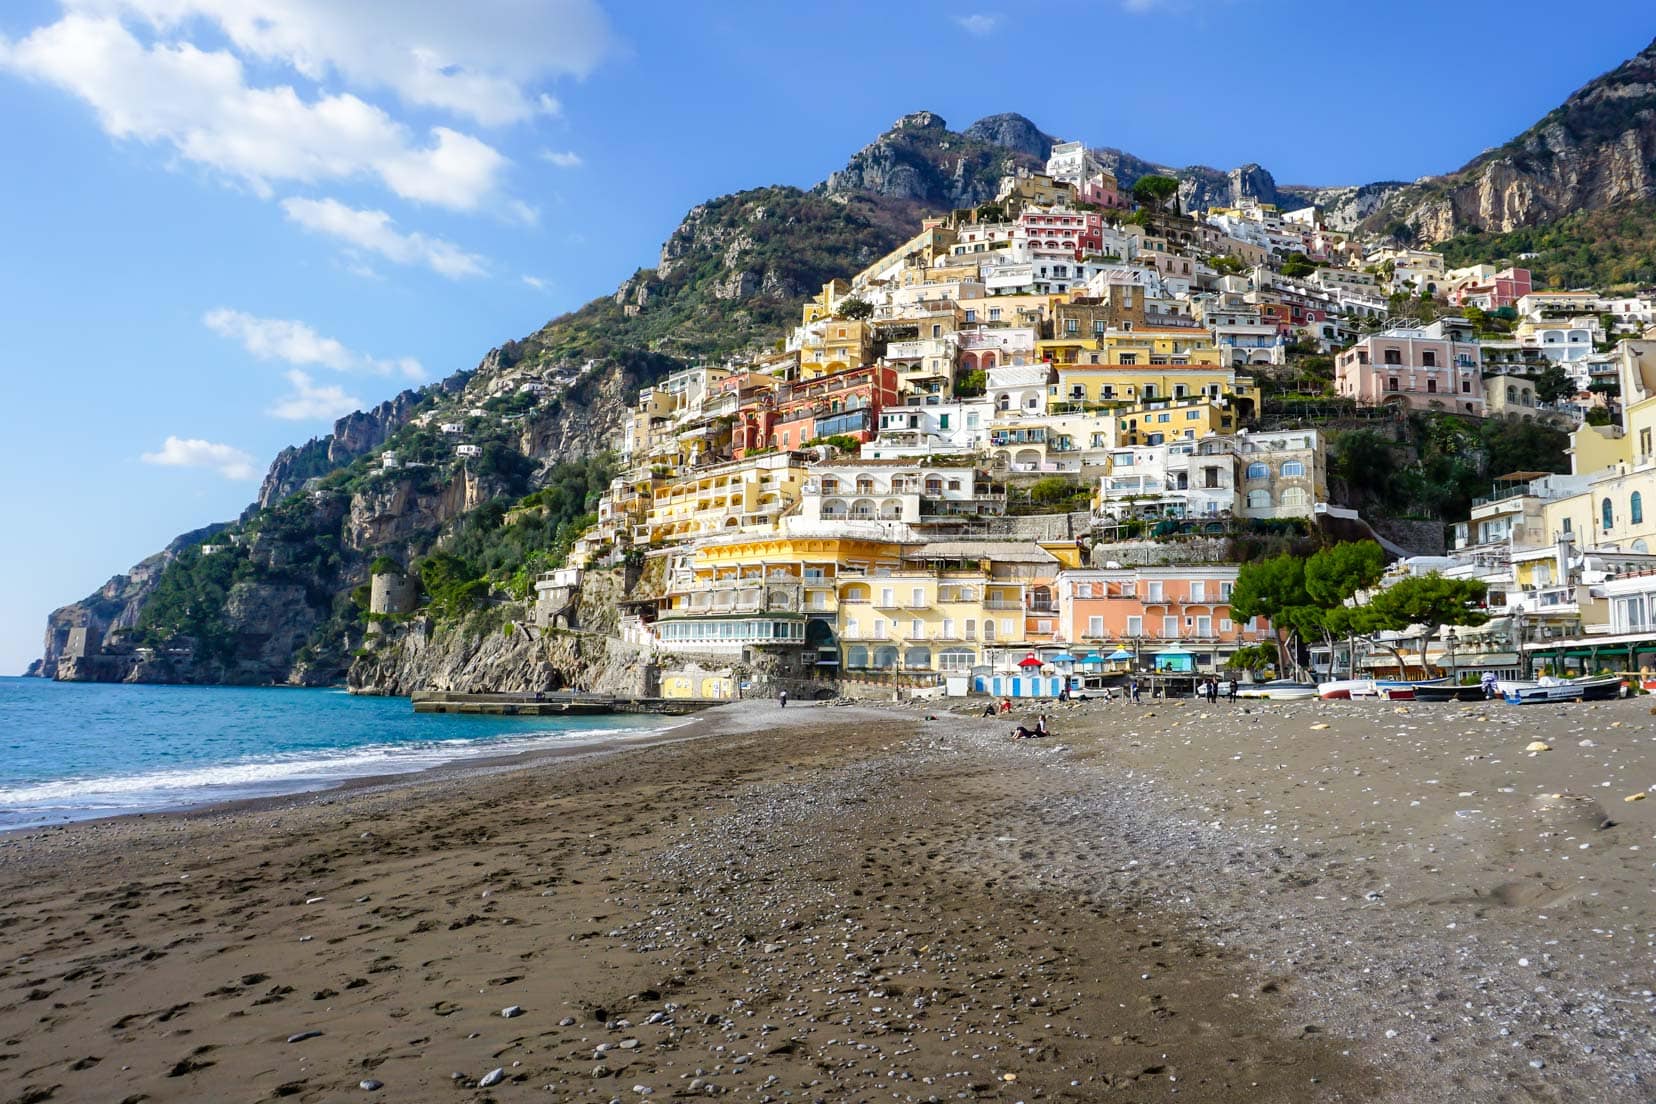 Positano with coloured houses on a steep cliff face and beach in the foreground